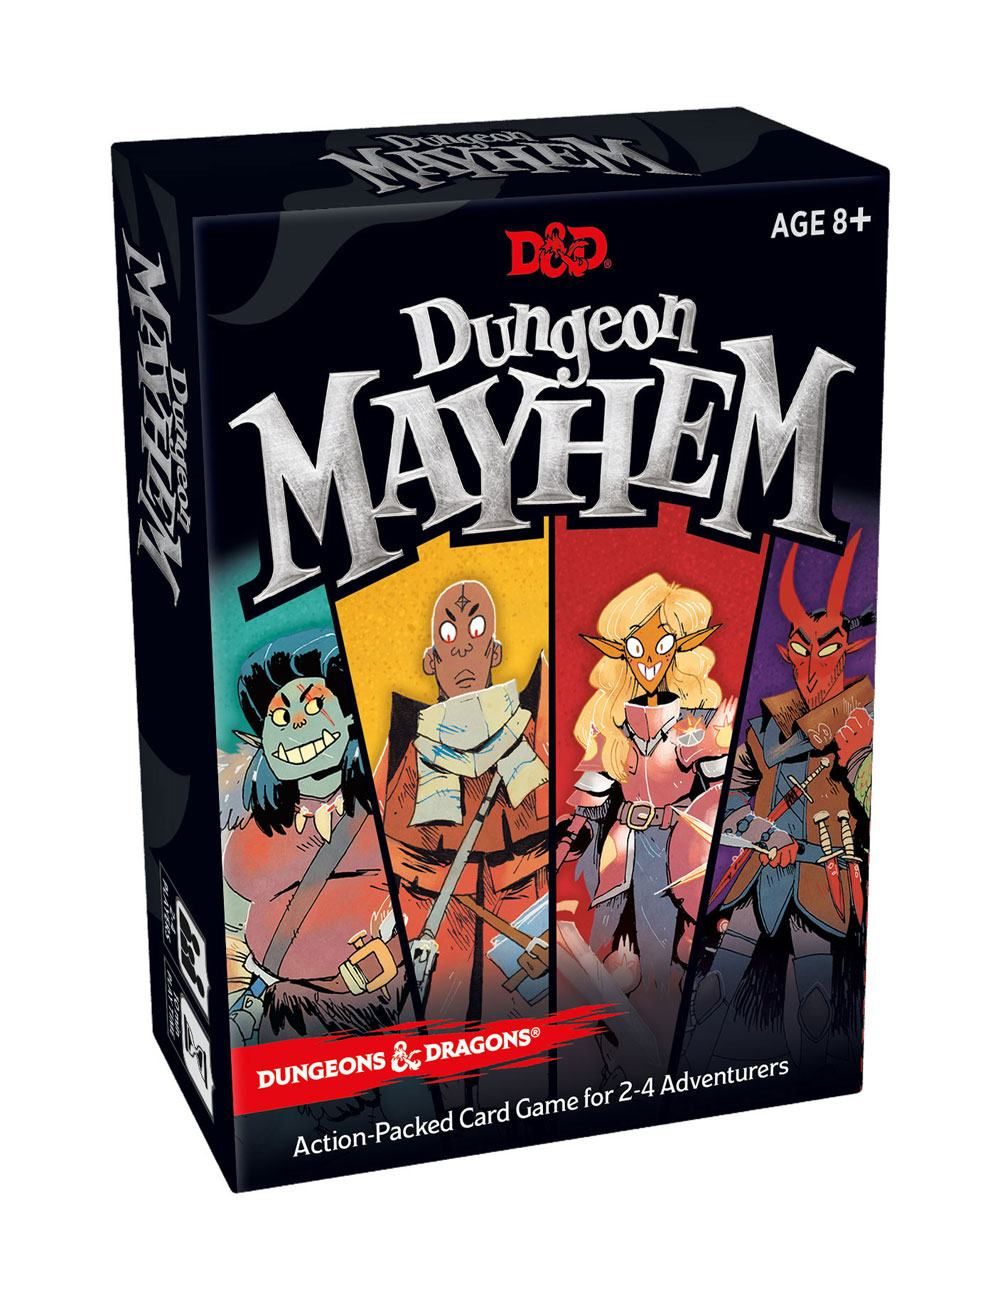 Dungeons & Dragons Card Game Dungeon Mayhem english Wizards of the Coast